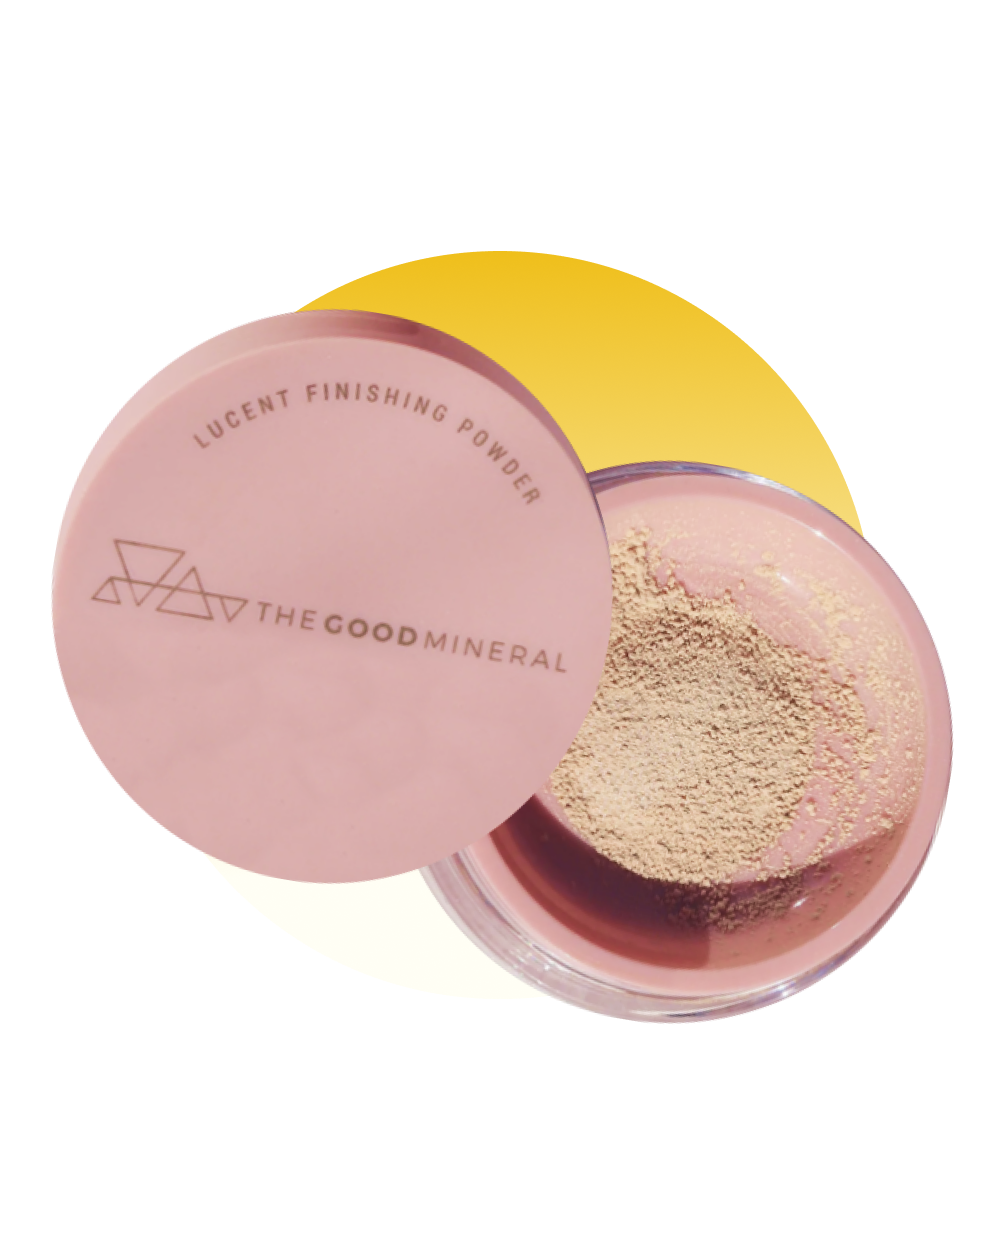 The Good Mineral Lucent Finishing Powder